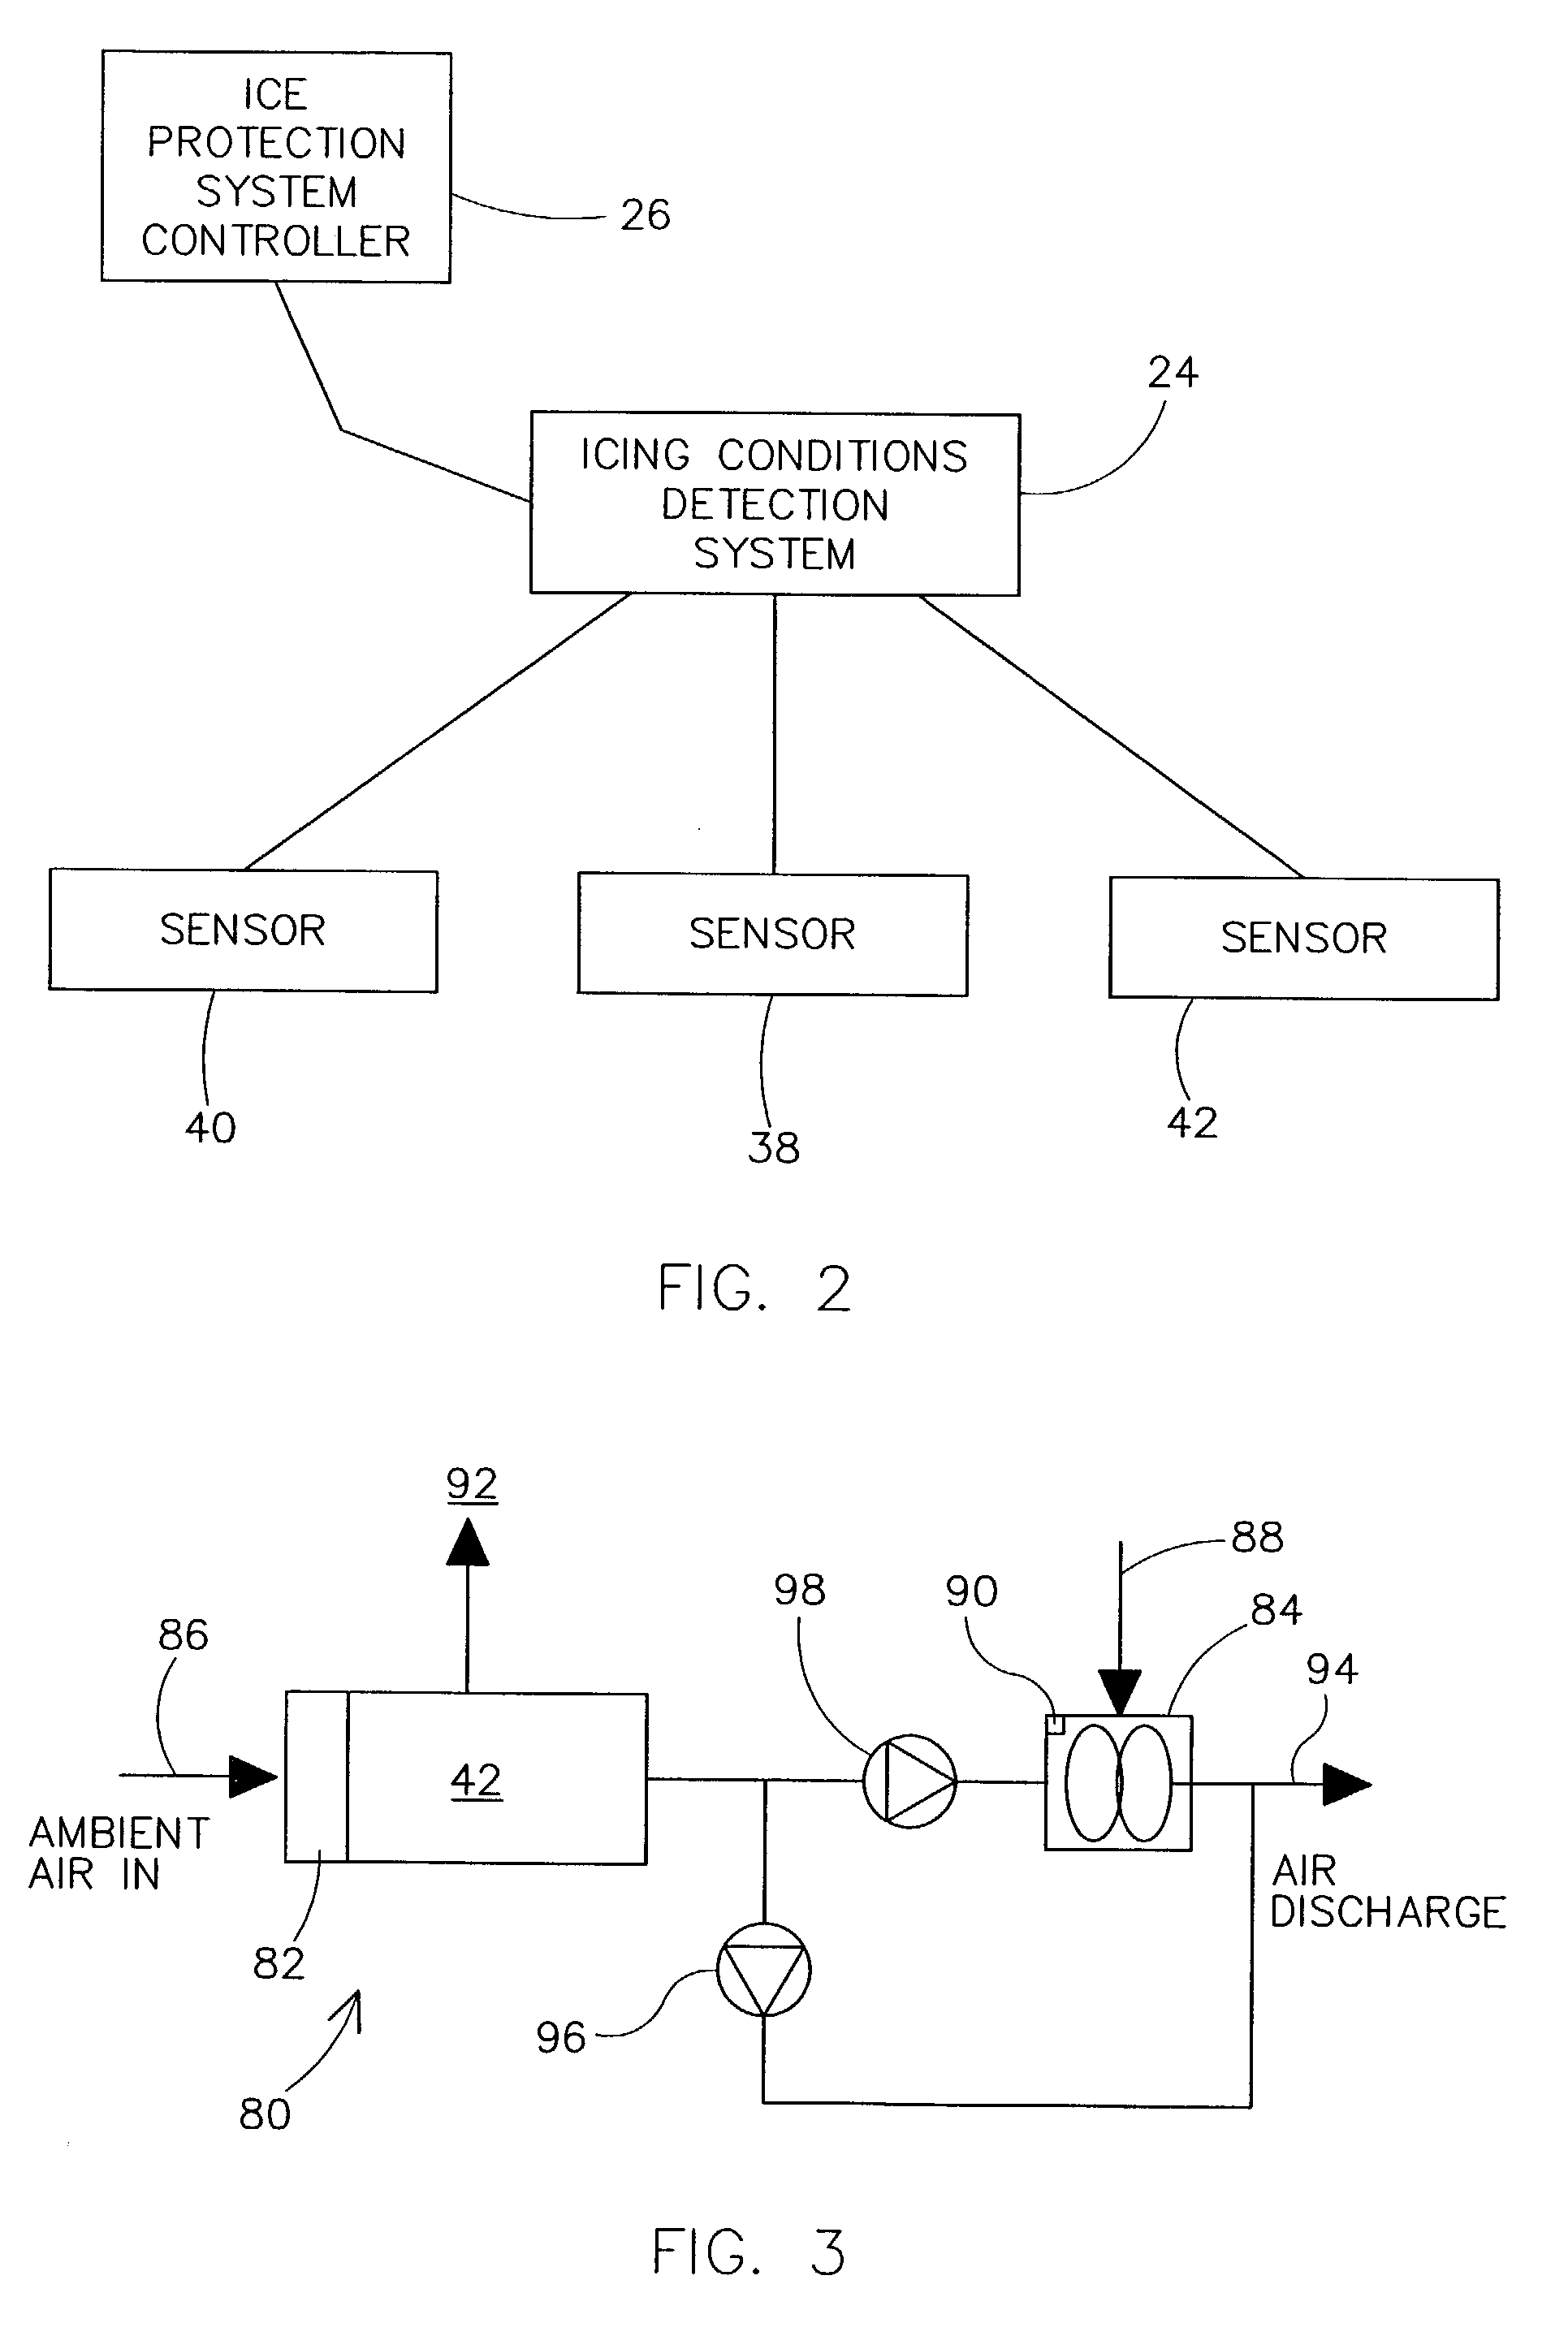 Method and apparatus for detecting conditions conducive to ice formation